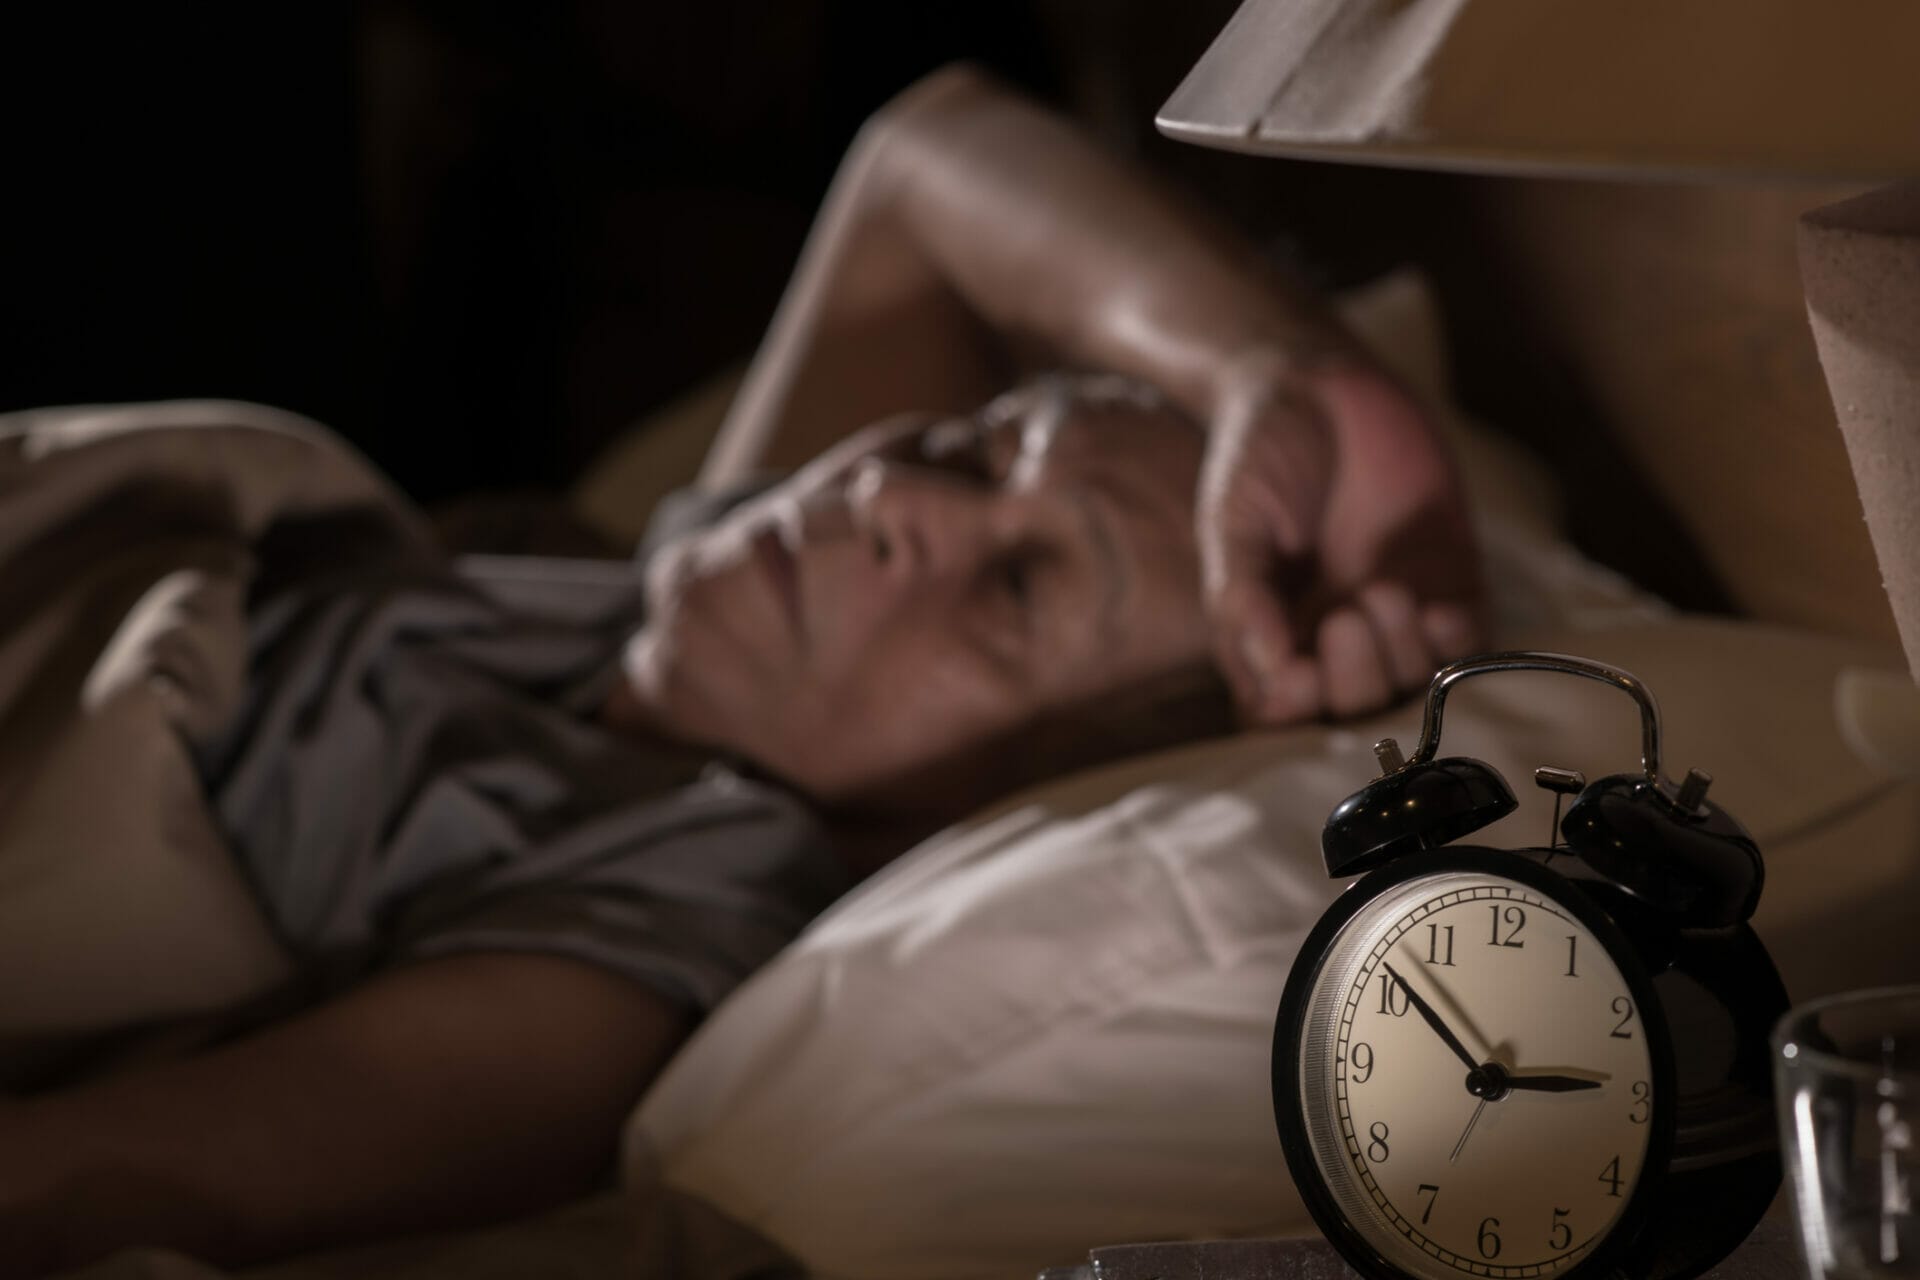 A senior man lying in bed cannot sleep from insomnia